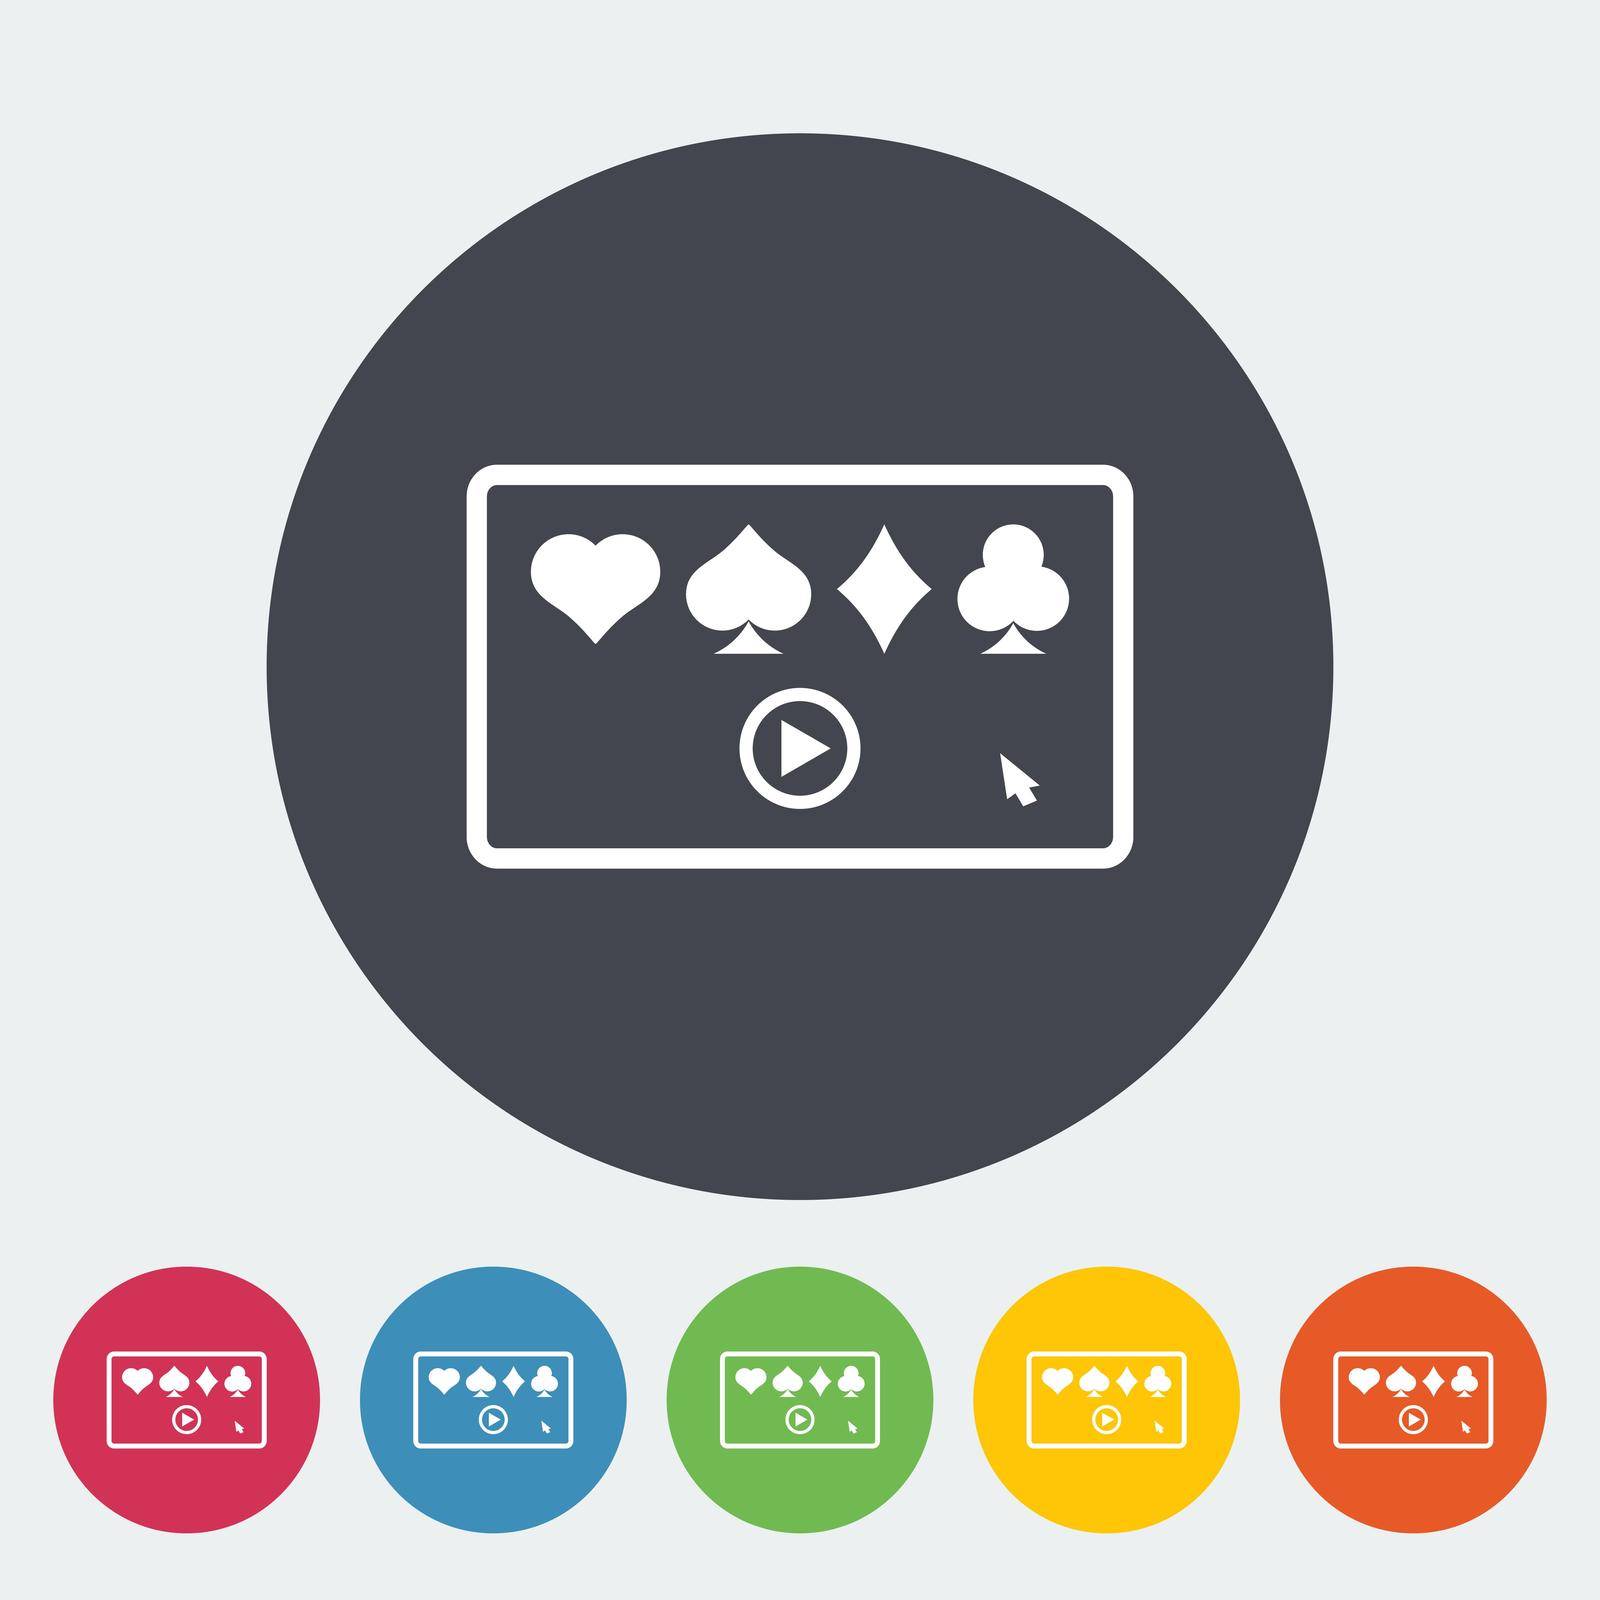 Video game. Single flat icon on the circle button. Vector illustration.